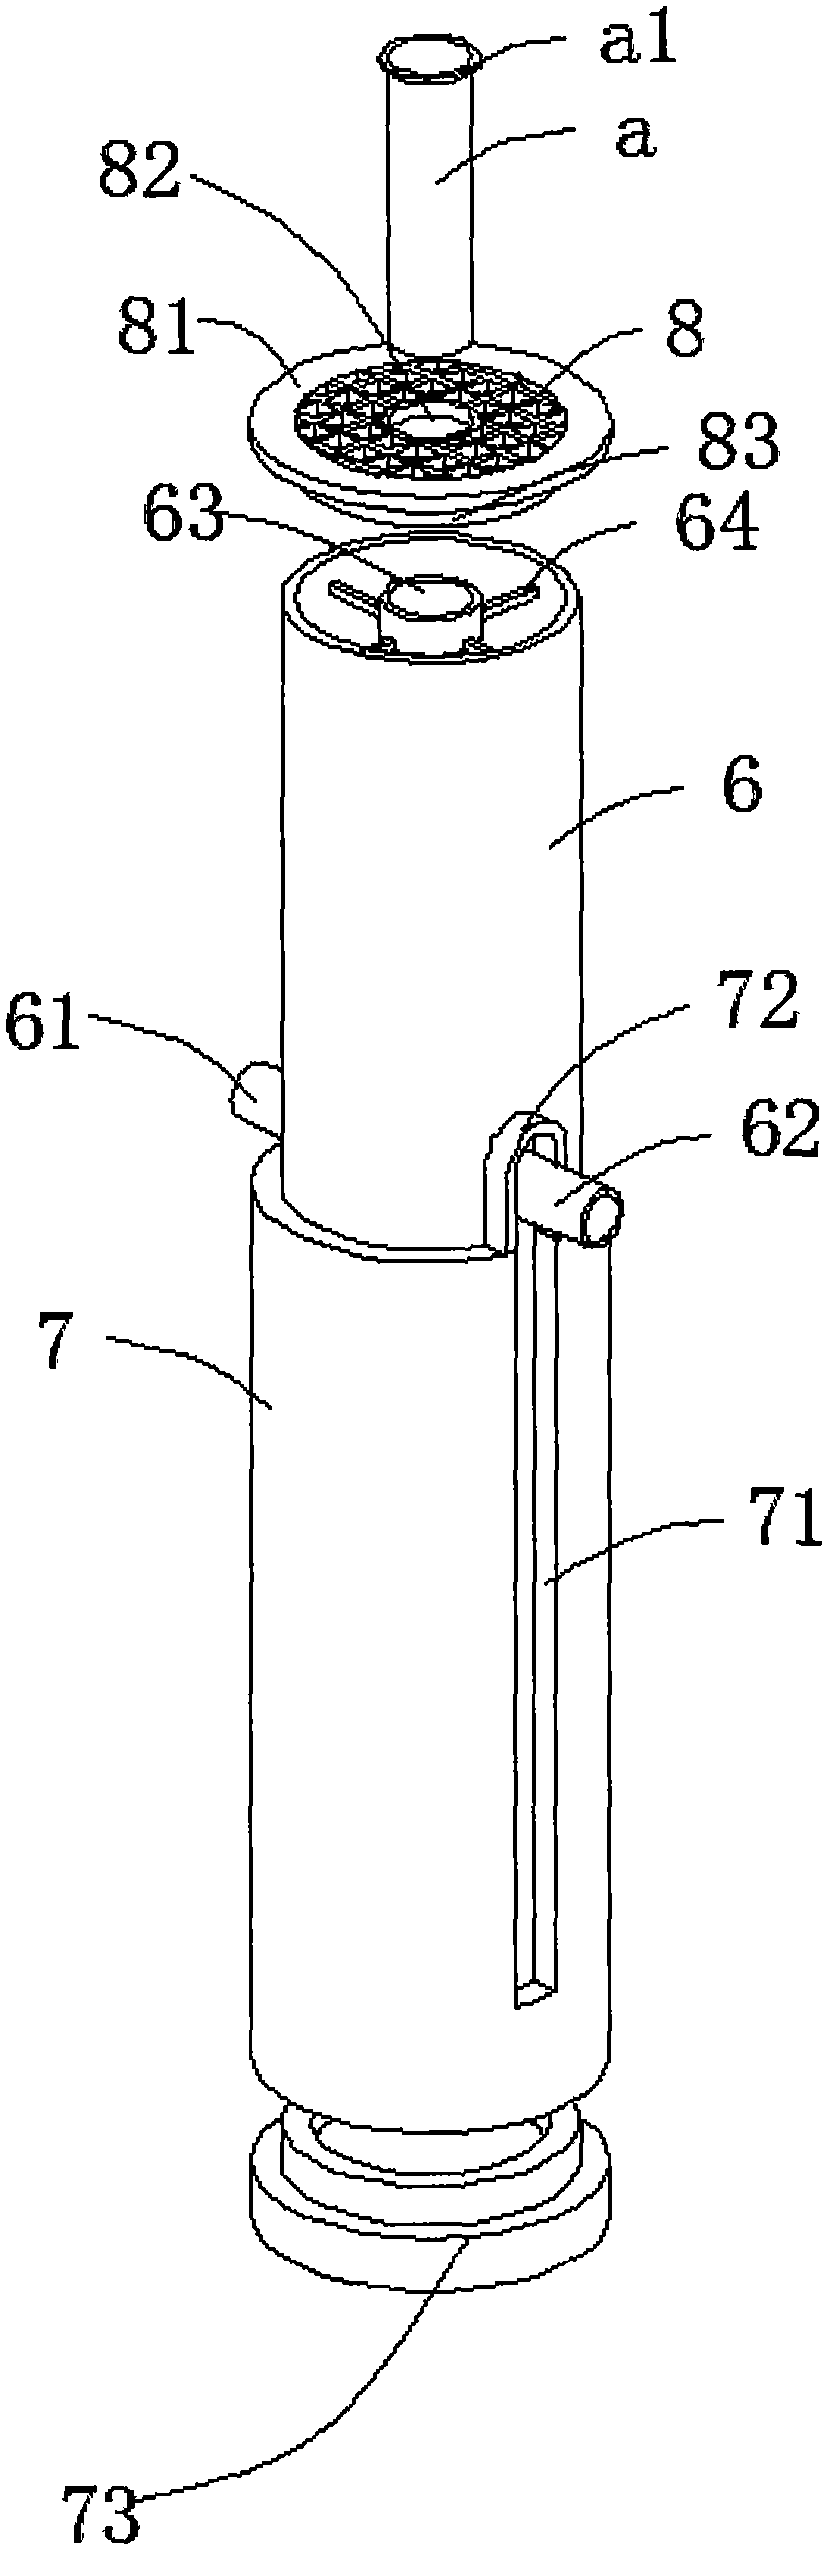 Corn root system growth research device